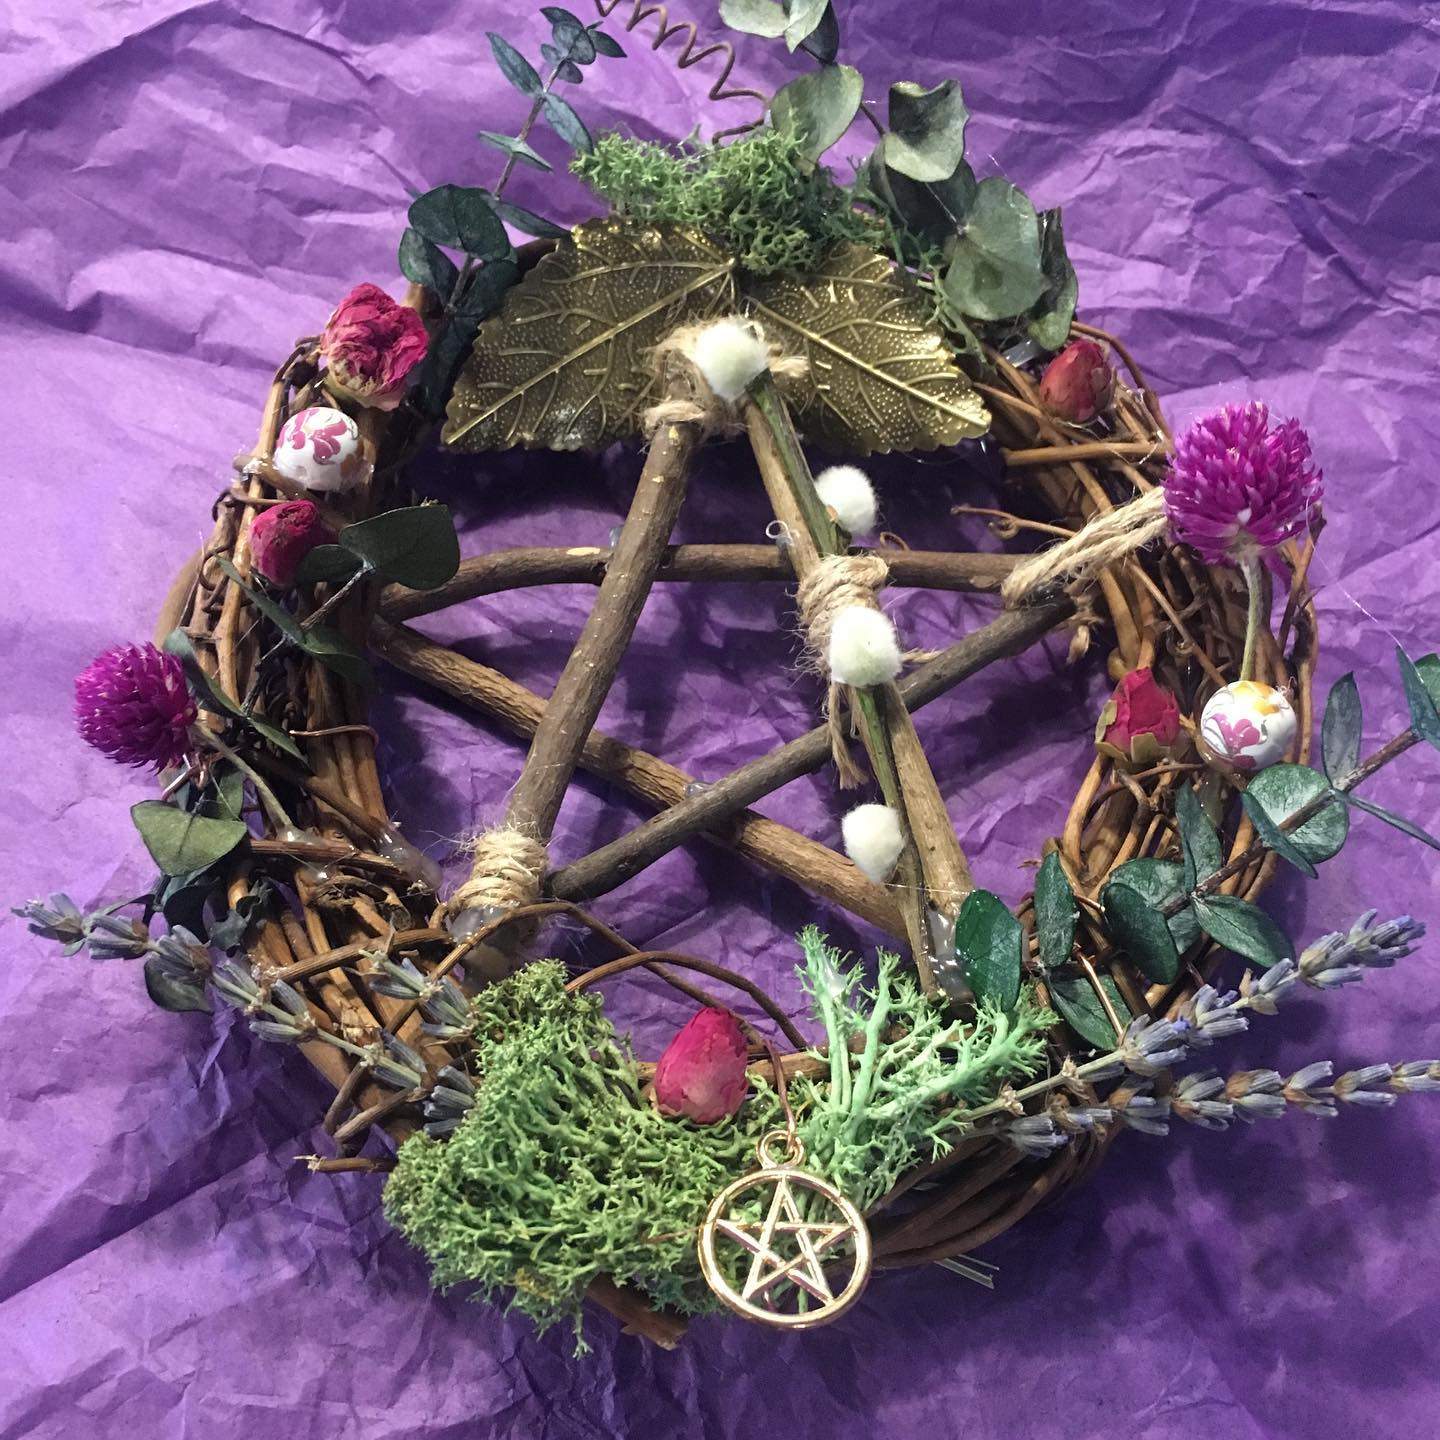 a wicker wheel decorated with flowers and greenery.